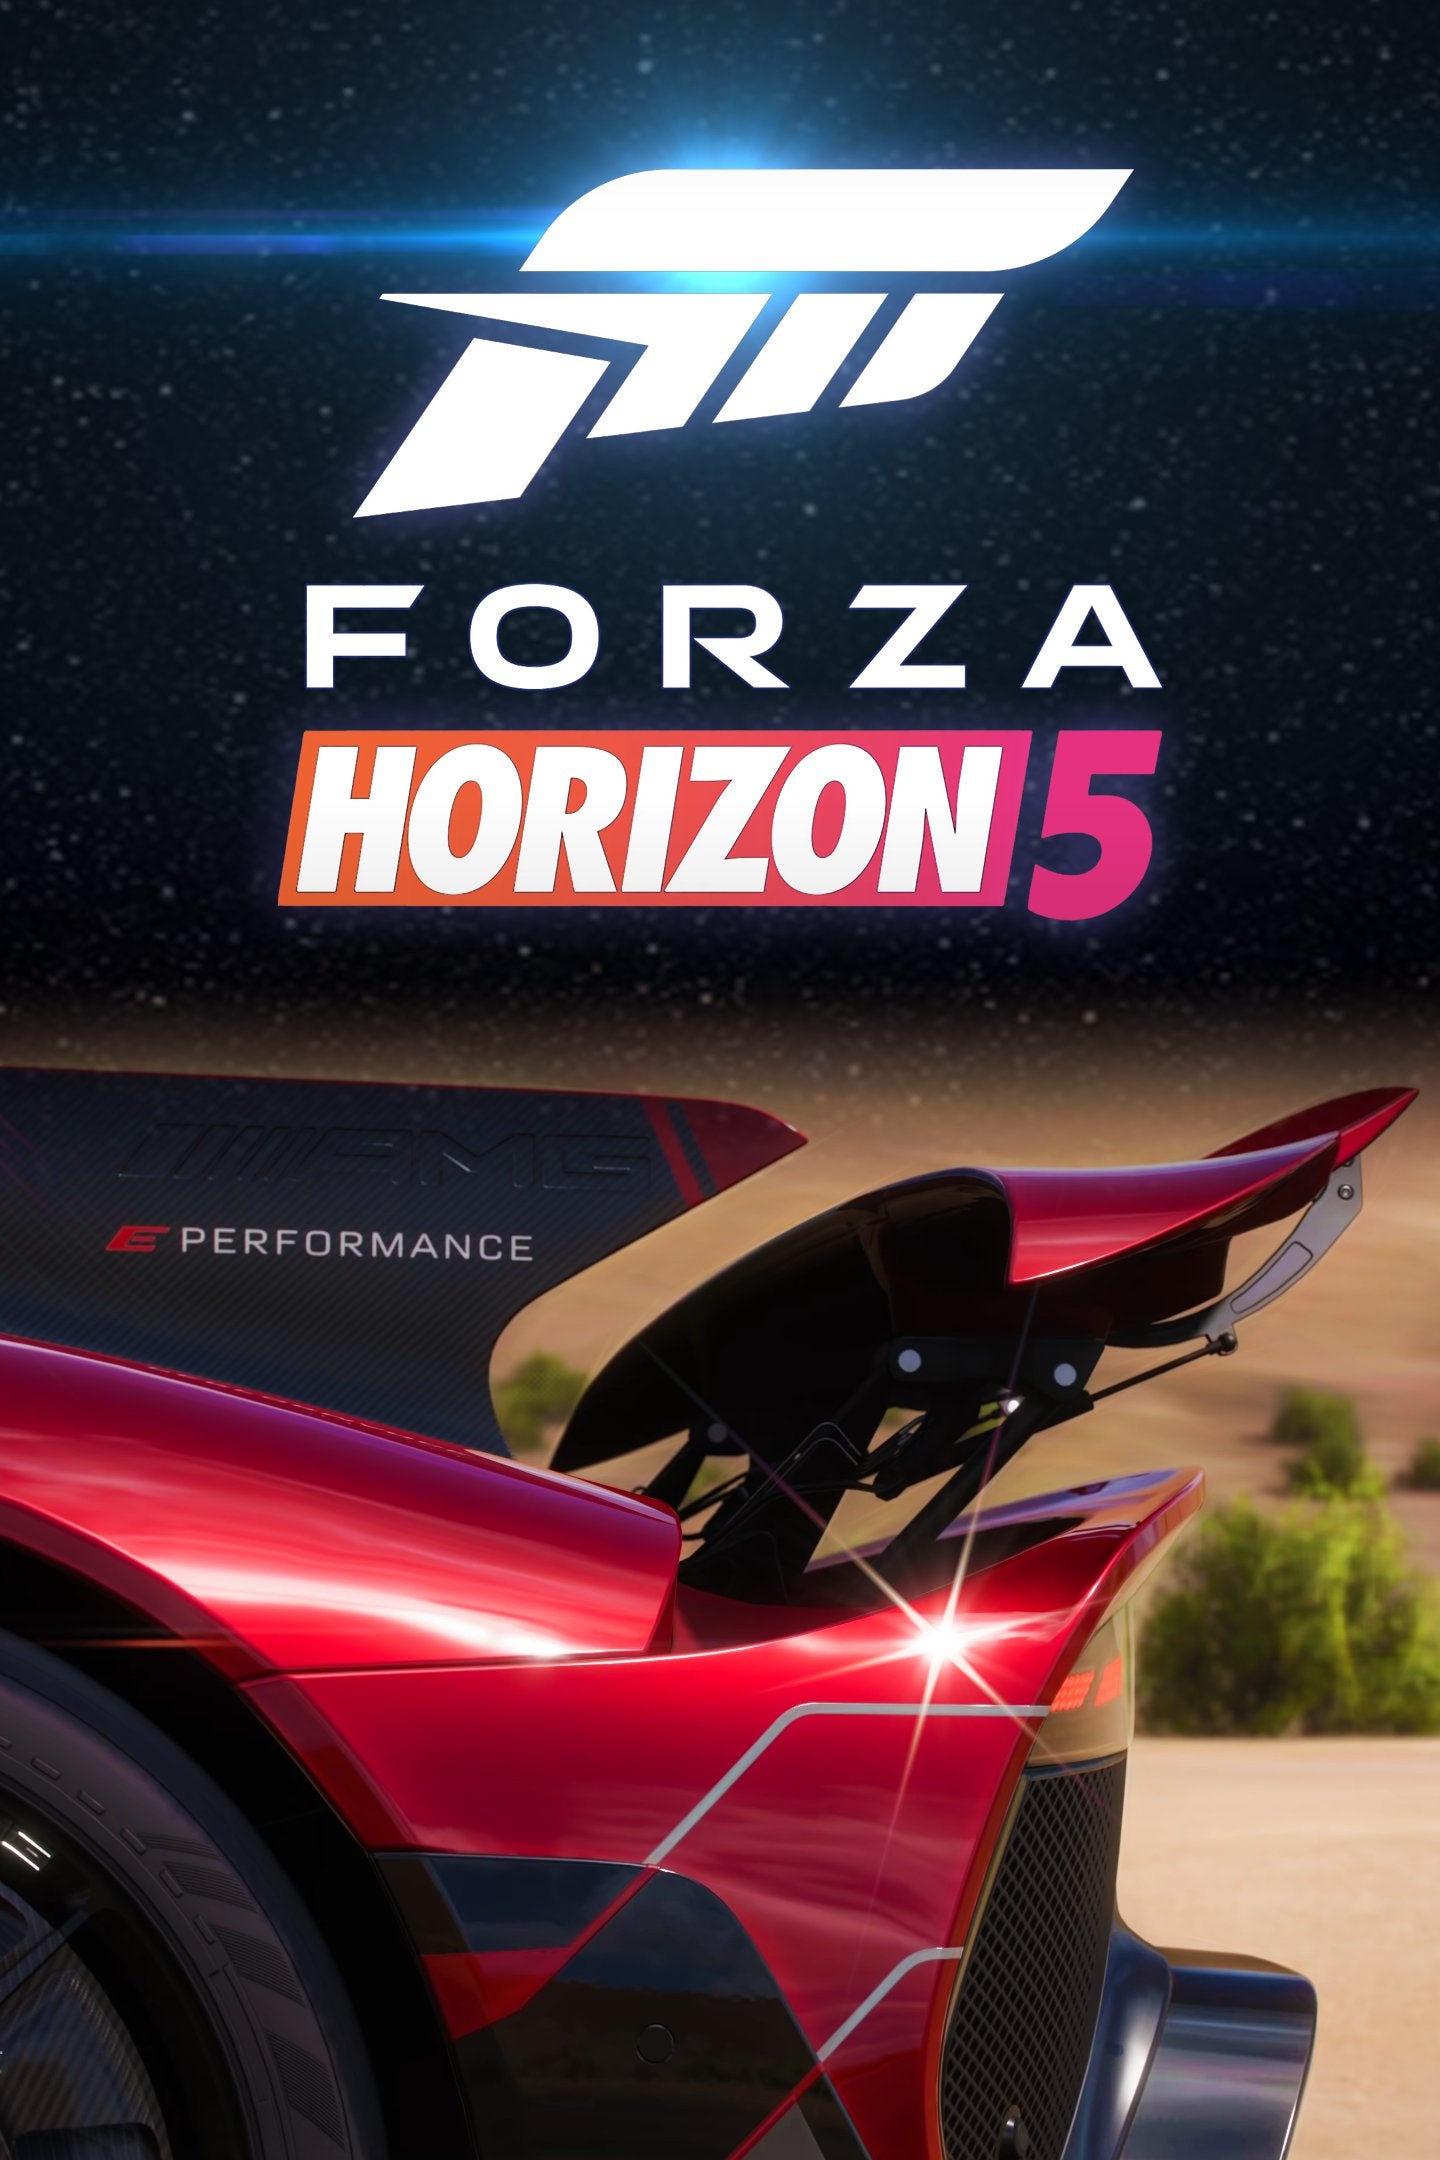 I M So Excited For Fh5 Had To Make This Forza Horizon